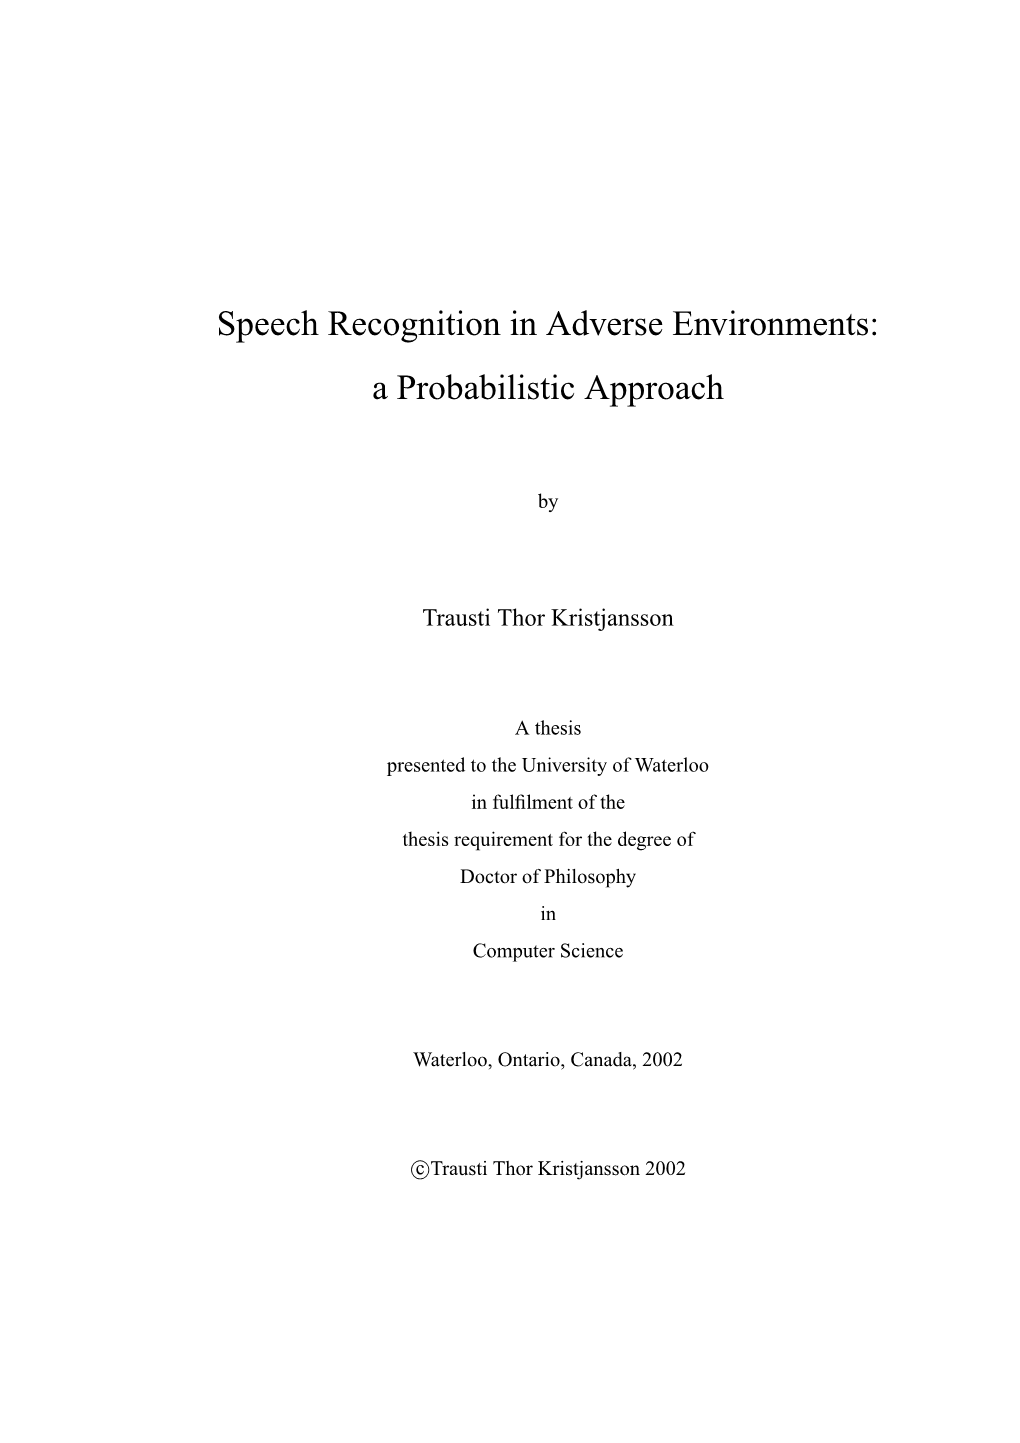 Speech Recognition in Adverse Environments: a Probabilistic Approach